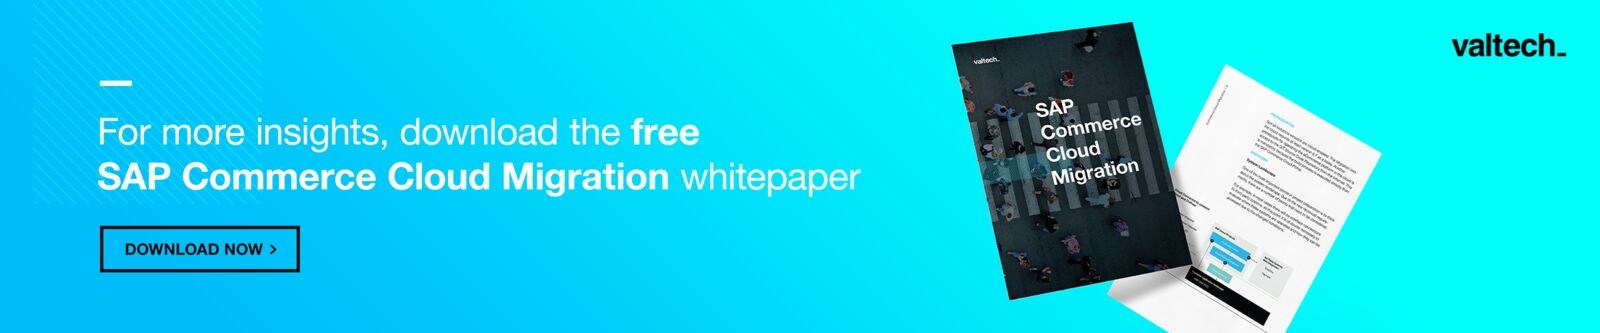 Banner ad for a SAP Commerce Whitepaper